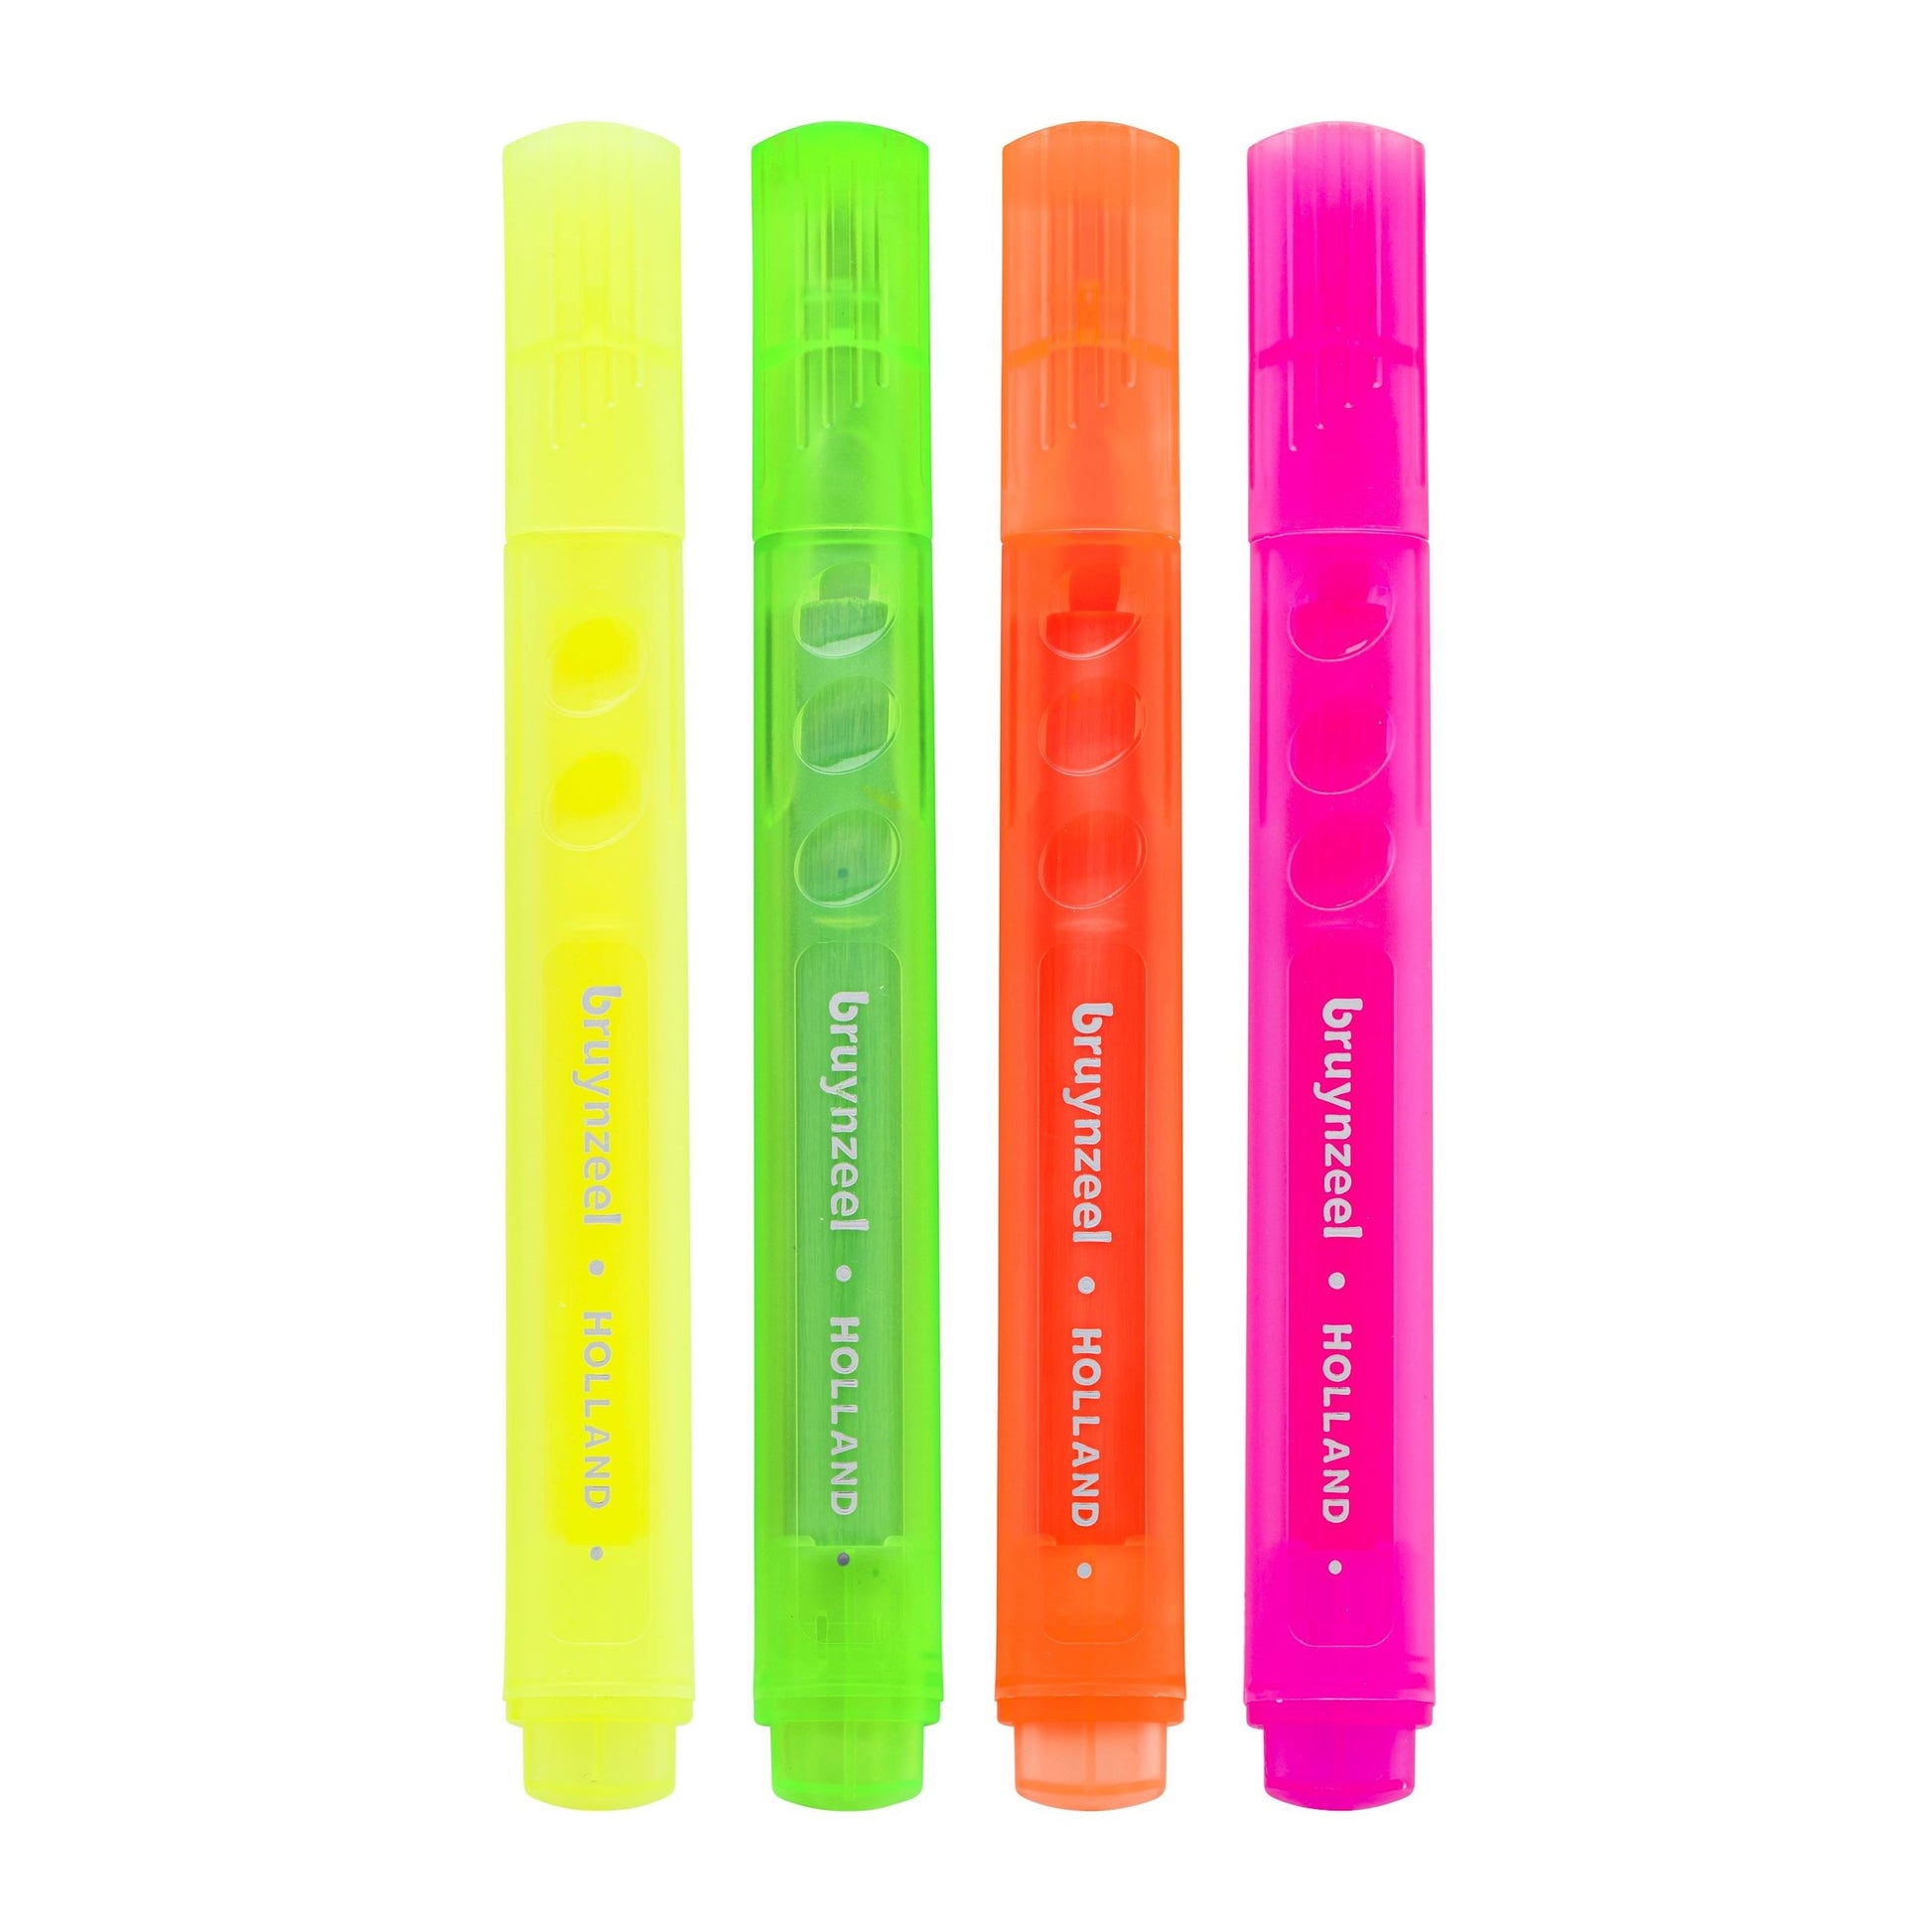 Bruynzeel College Neon Highlighter Pens 4 pack colours - Paper Dream